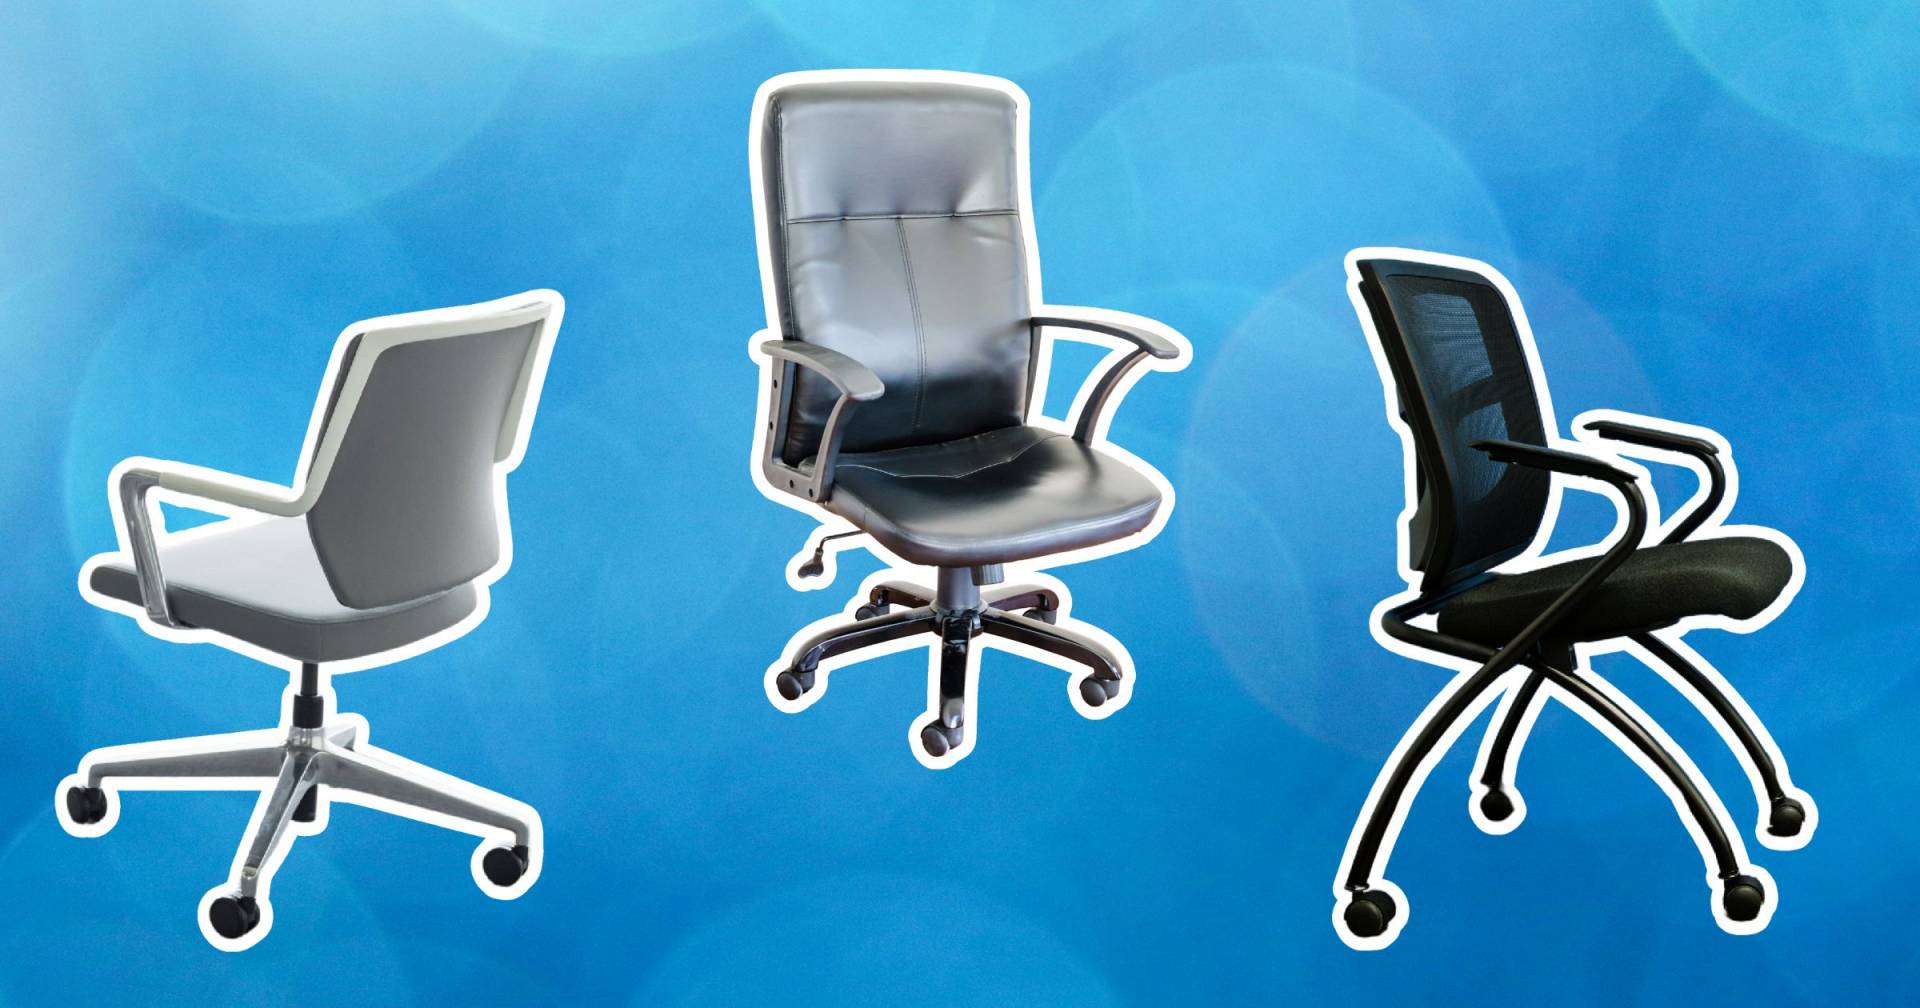 Best Comfy Office Chair 1681223482 1920 60 